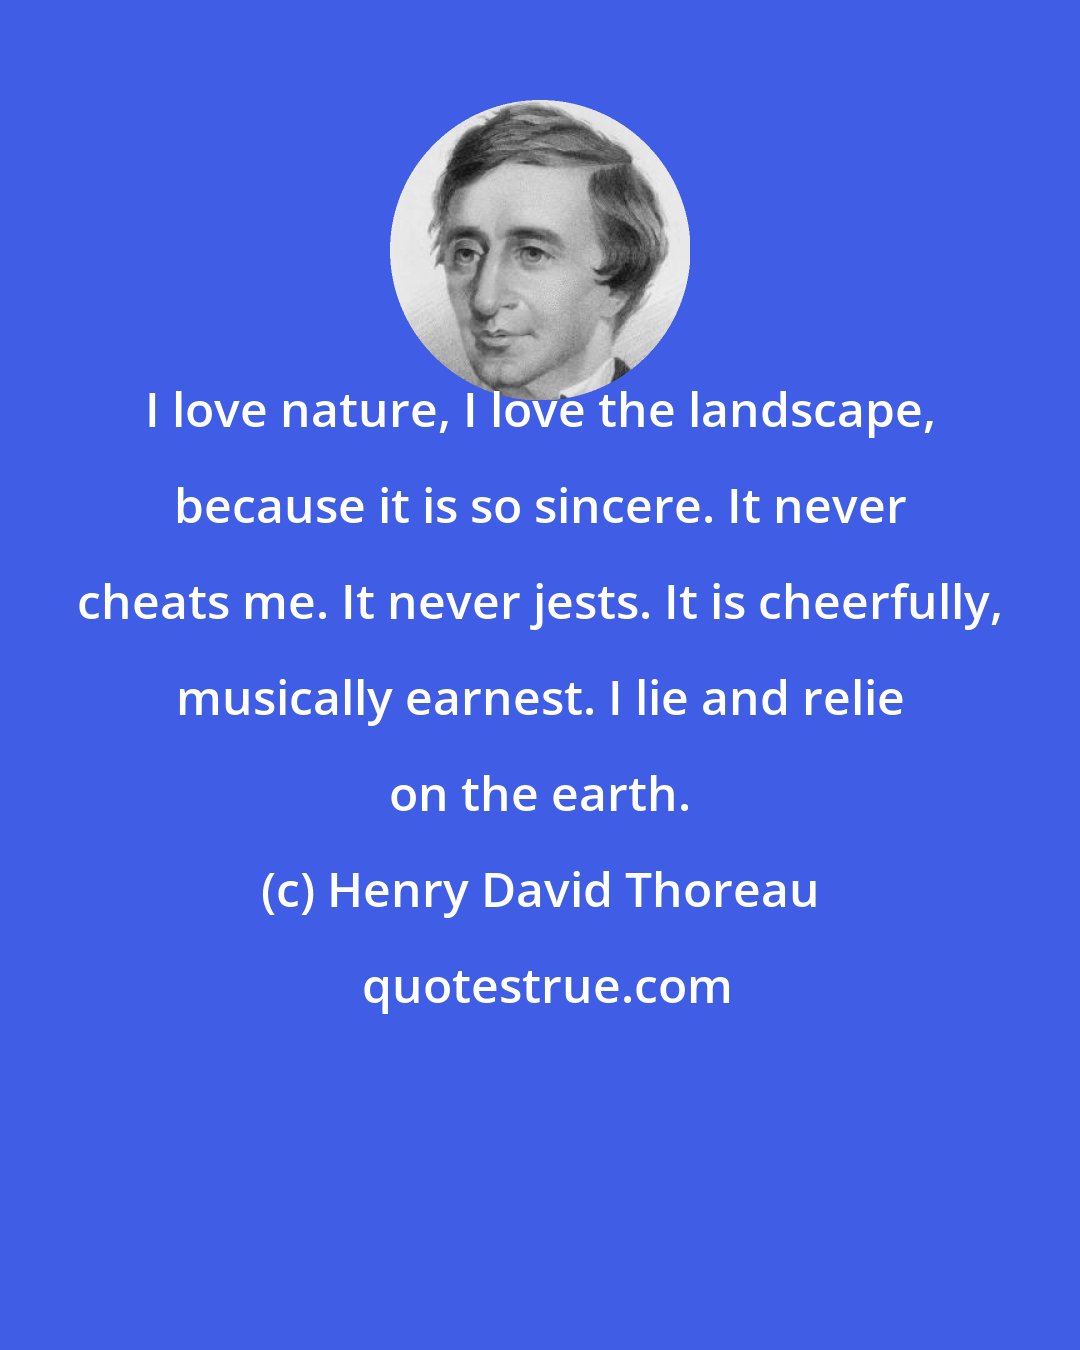 Henry David Thoreau: I love nature, I love the landscape, because it is so sincere. It never cheats me. It never jests. It is cheerfully, musically earnest. I lie and relie on the earth.